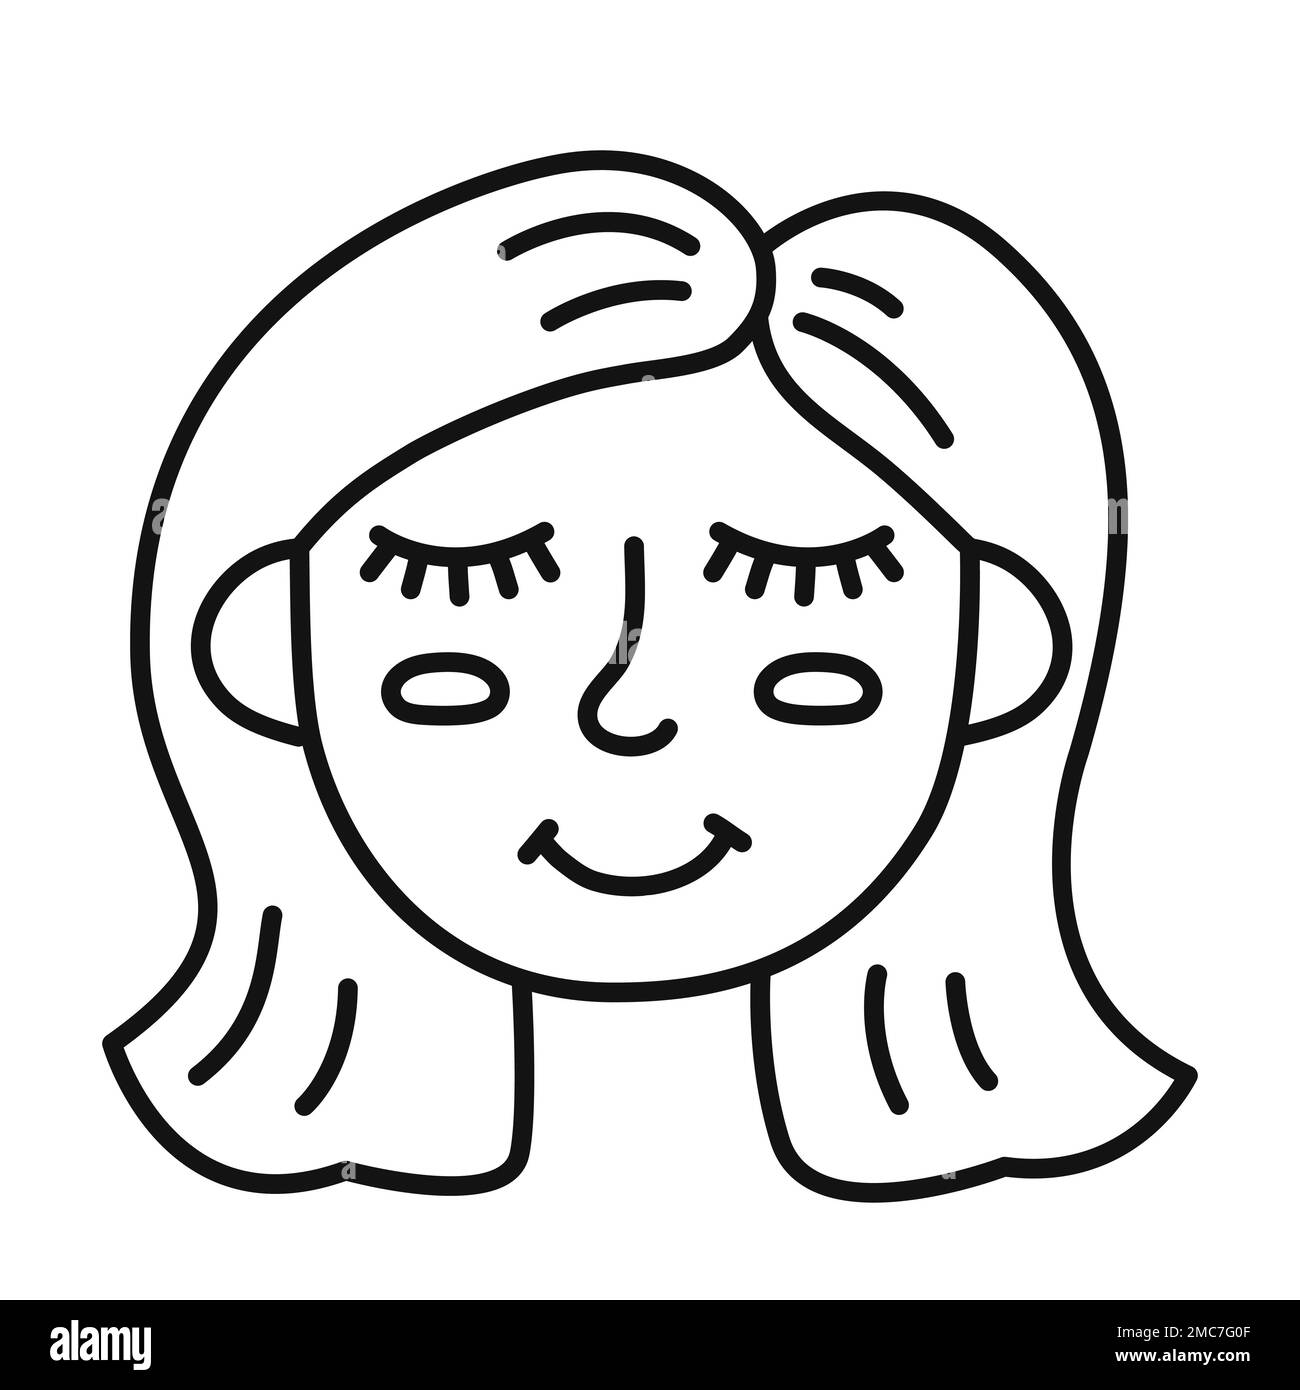 Hand drawn portrait of a girl. Doodle sketch style. Isolated vector illustration. Stock Vector